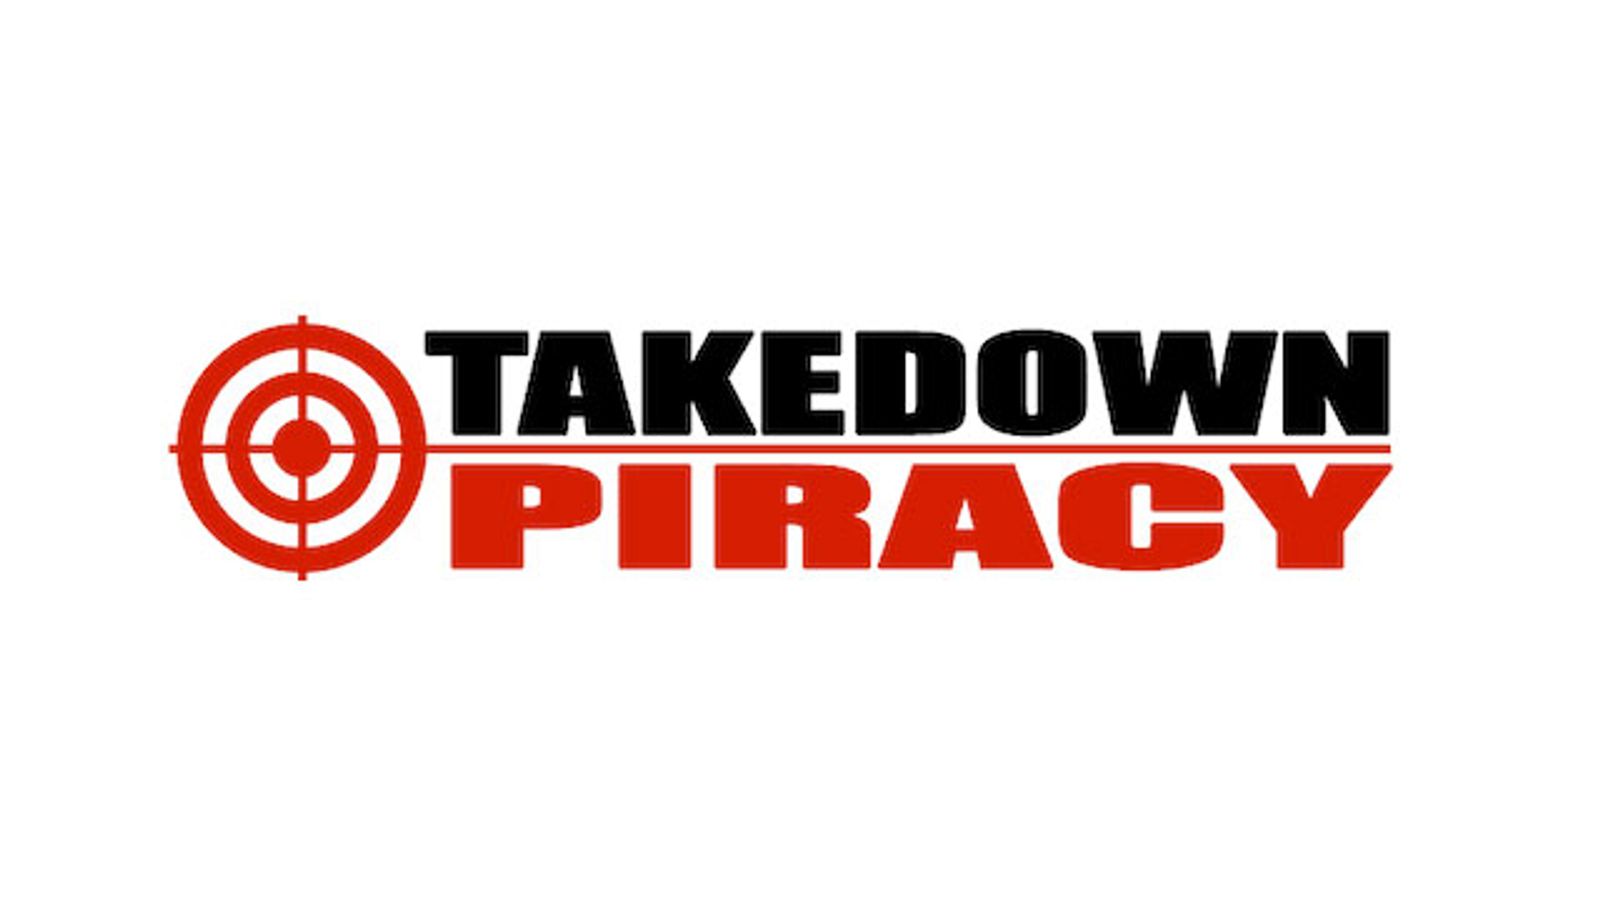 Takedown Piracy Reports Success With Digital Fingerprinting Tech